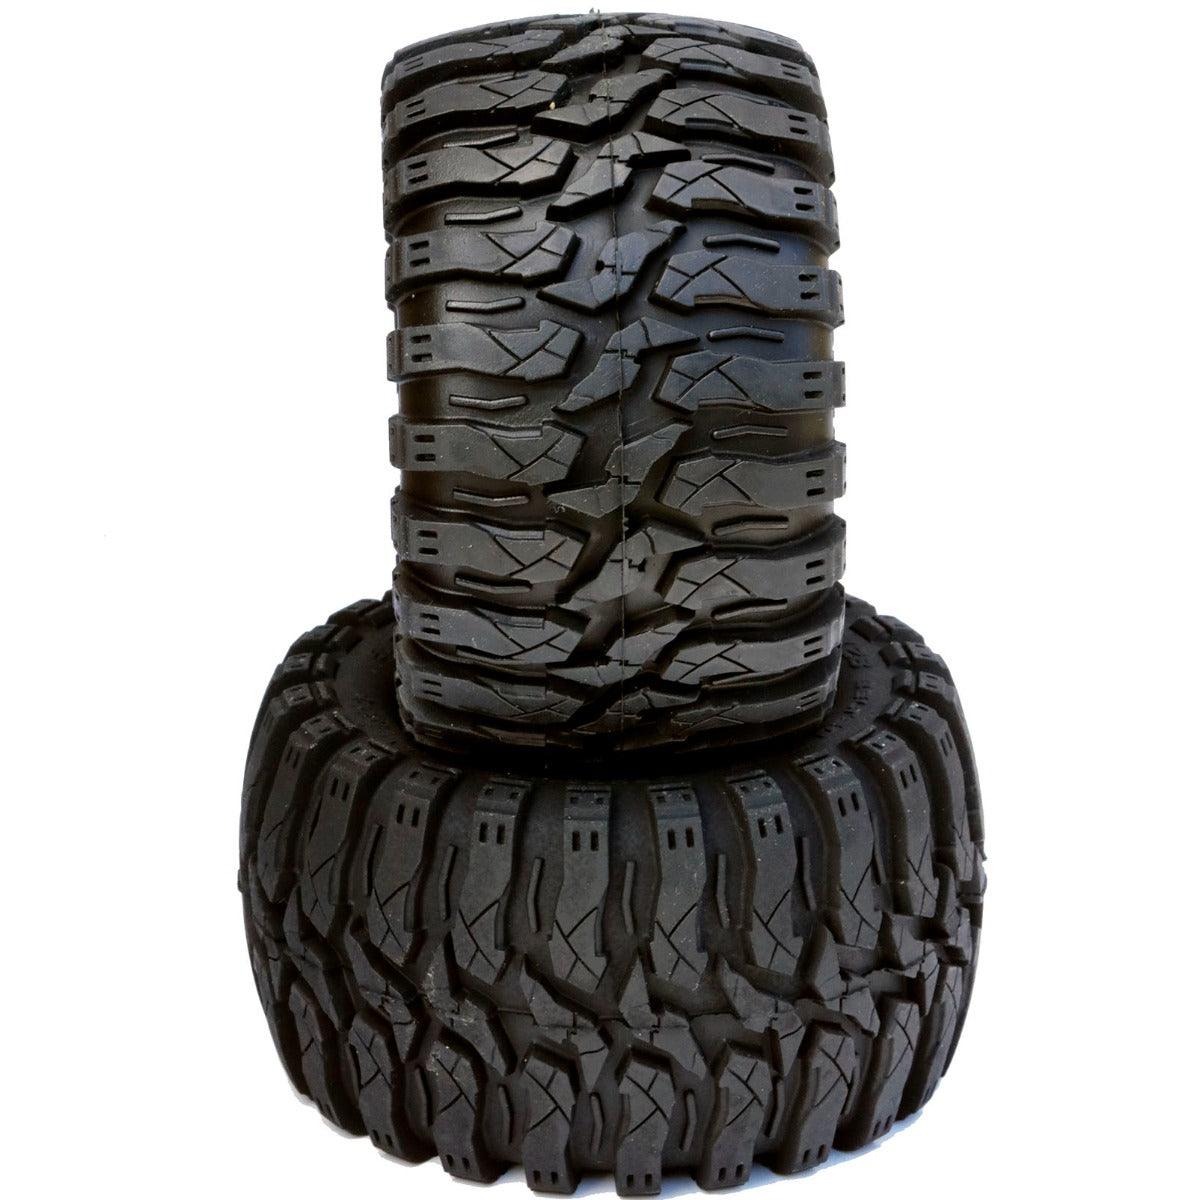 Powerhobby Defender 2.8 Belted All Terrain Tires 12mm 0 Offset Rear FOR Traxxas 2WD - PowerHobby